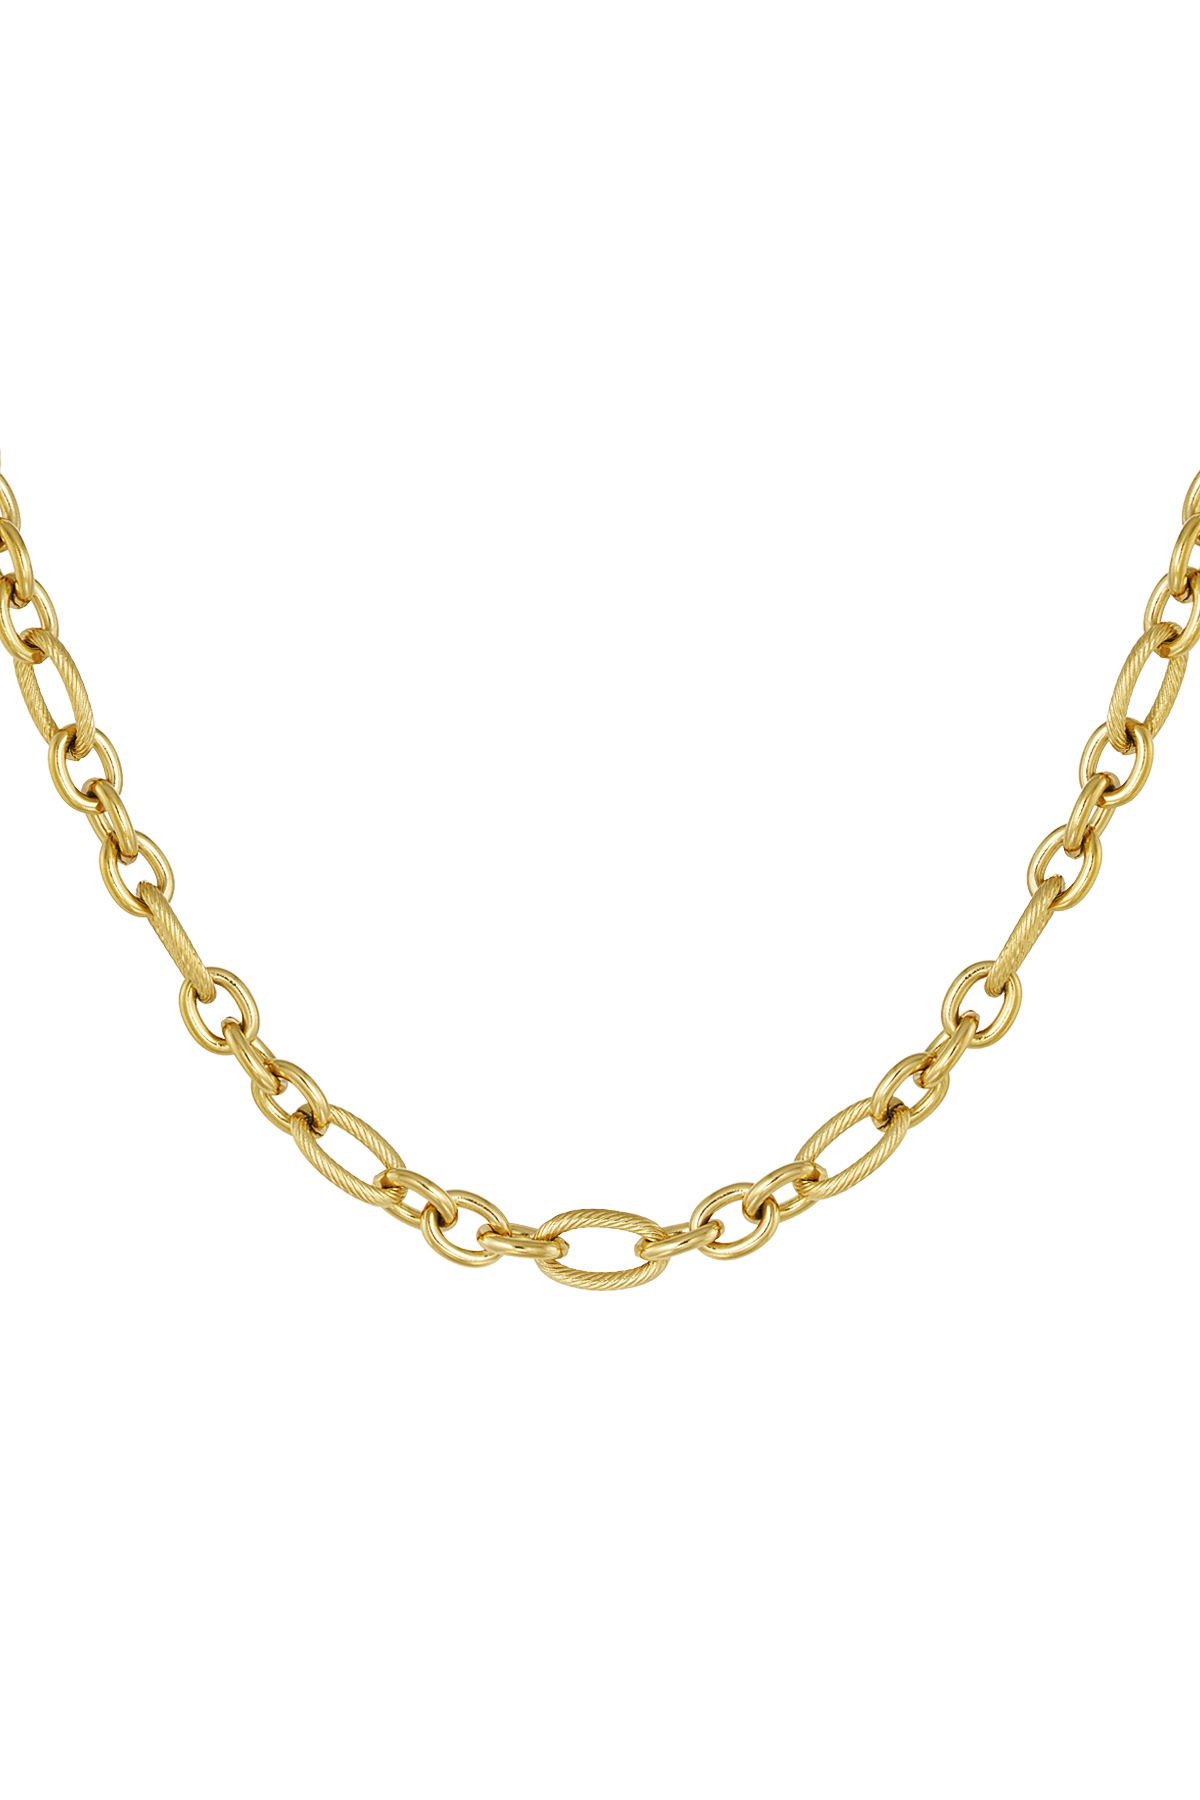 Link chain small and large links - gold h5 